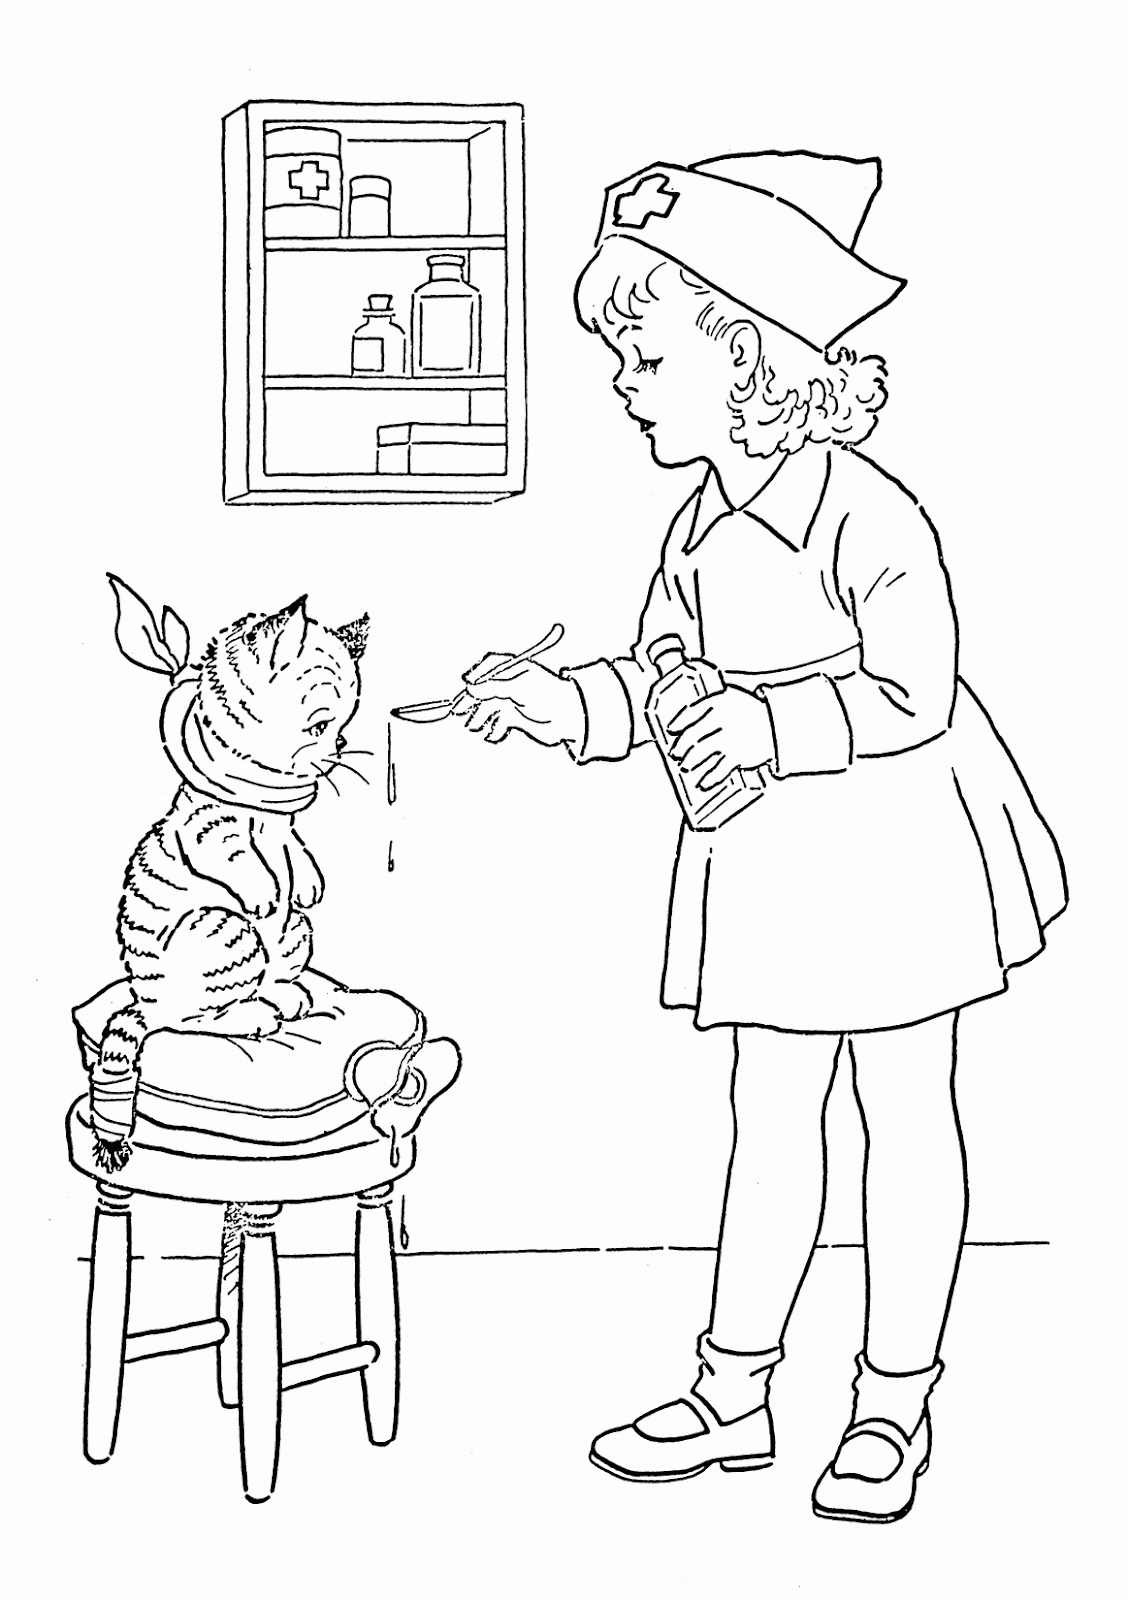 Nurse Coloring Page - Coloring Pages for Kids and for Adults